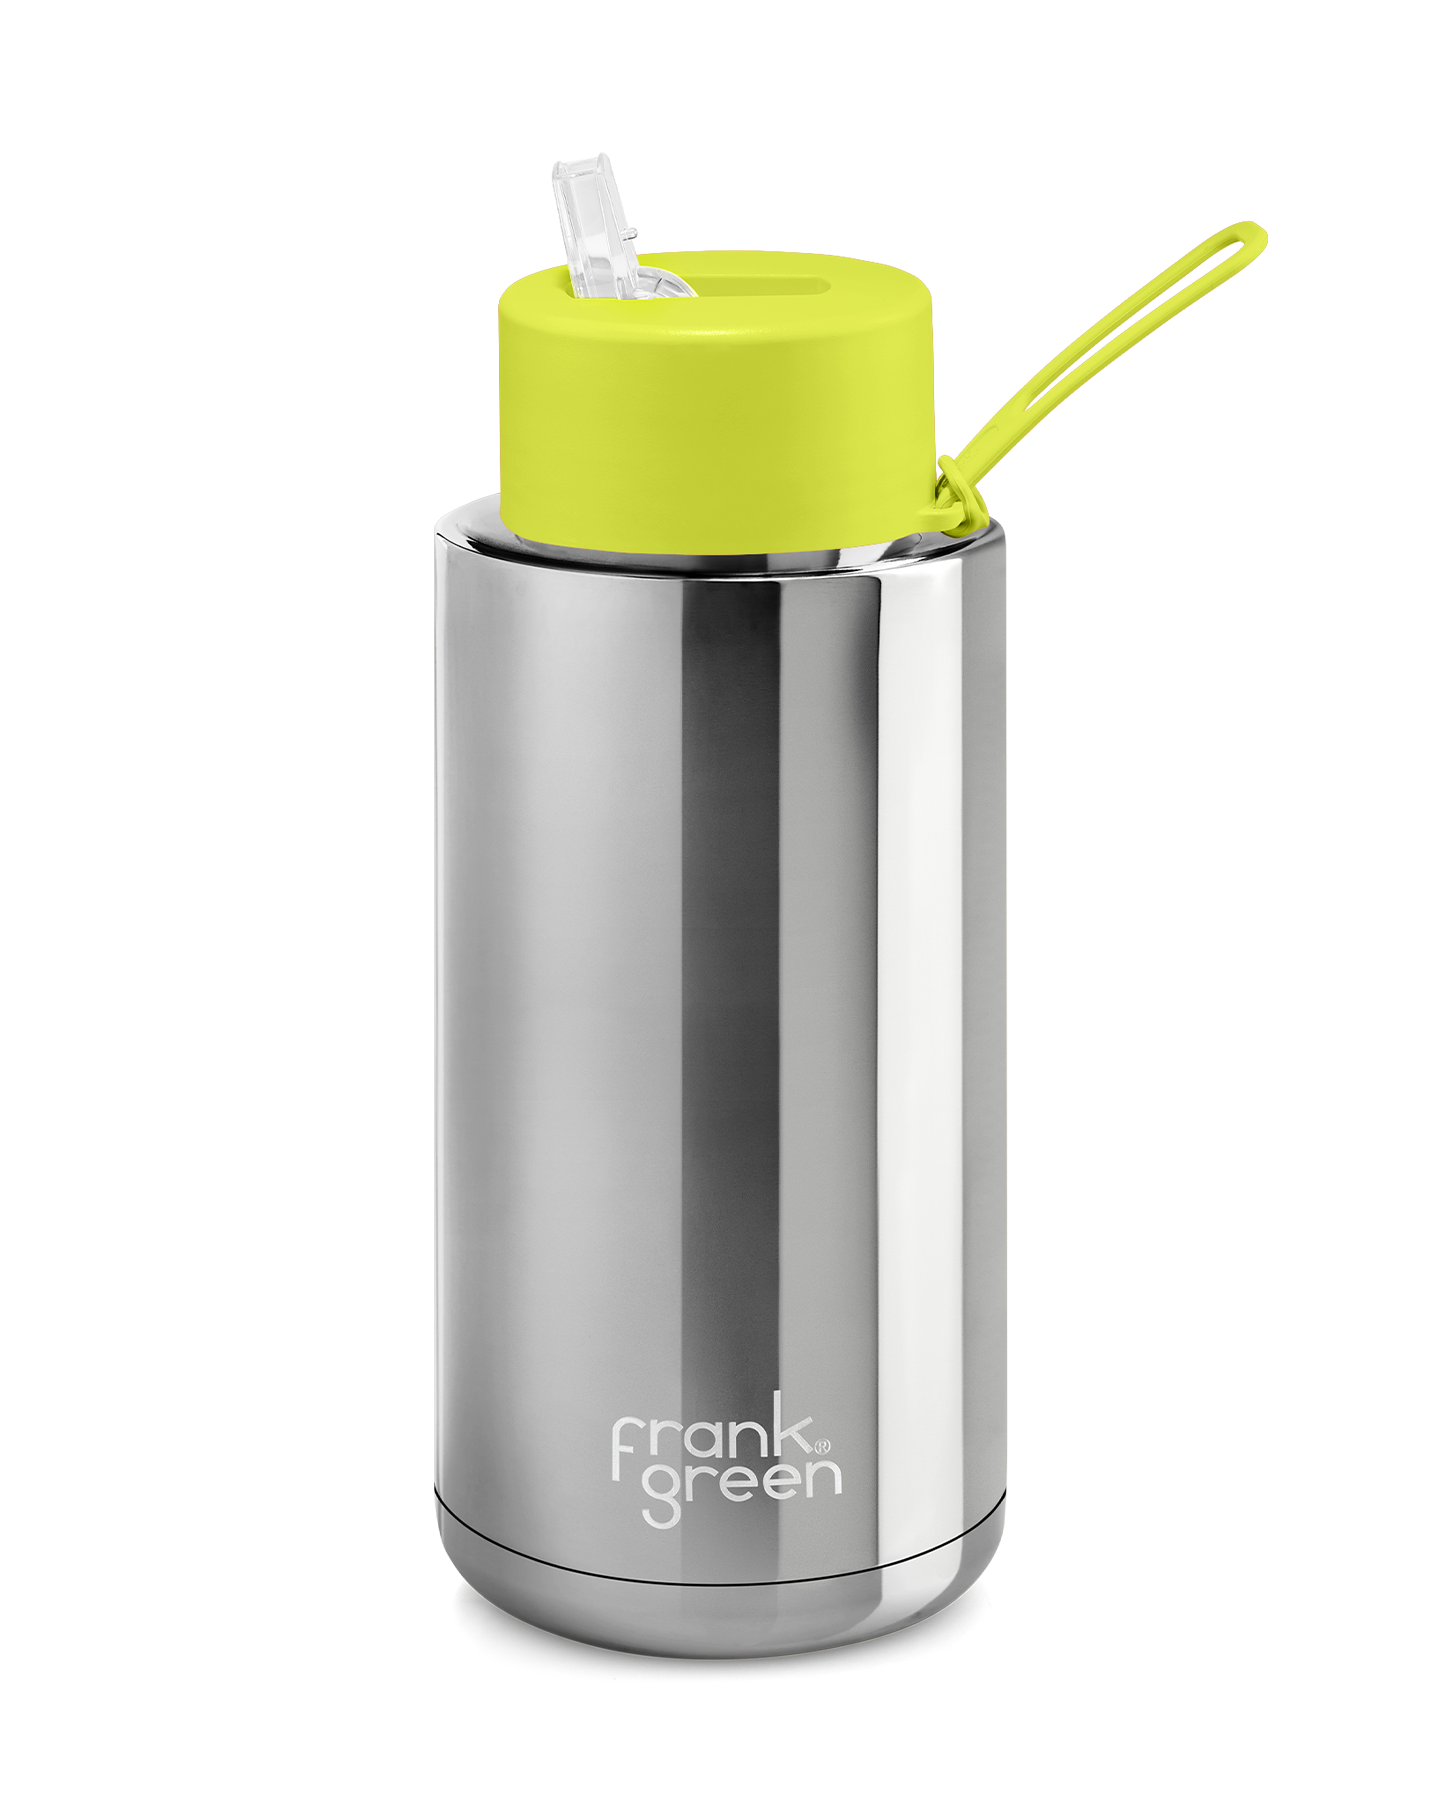 FRANK GREEN CHROME SILVER CERAMIC REUSABLE BOTTLE 34oz/1 LITRE WITH STRAW LID - NEON YELLOW